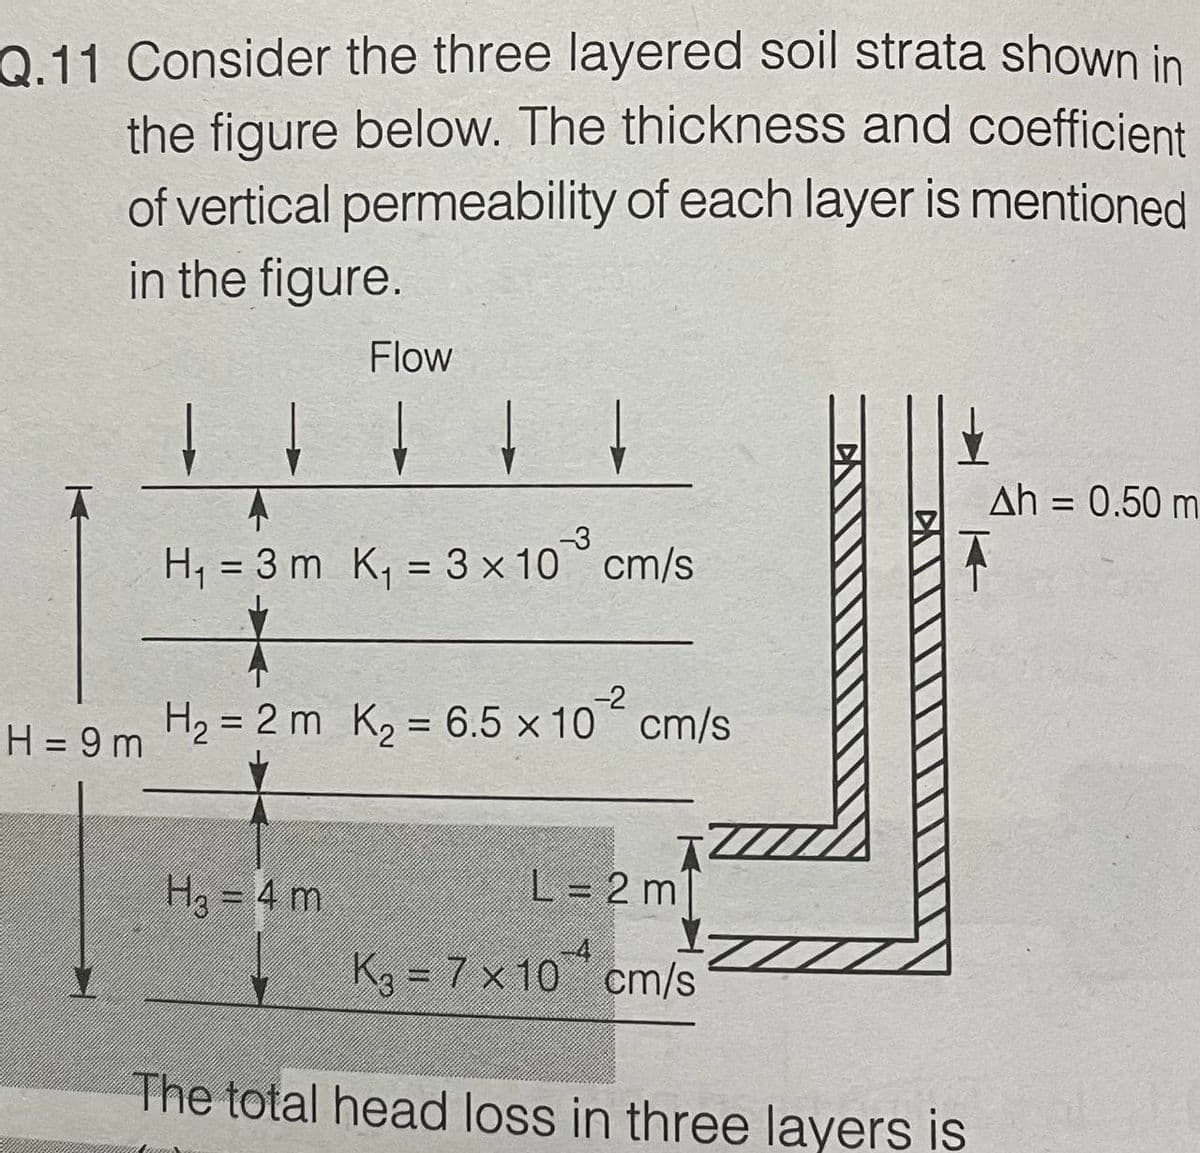 Q.11 Consider the three layered soil strata shown in
the figure below. The thickness and coefficient
of vertical permeability of each layer is mentioned
in the figure.
Flow
Ah = 0.50 m
-3
H, = 3 m K, = 3 x 10° cm/s
%3D
-2
H2 = 2 m K, = 6.5 x 10 cm/s
H = 9 m
H3 = 4 m.
L = 2 m
-4
Kg = 7 x 10 cm/s
The total head loss in three layers is
